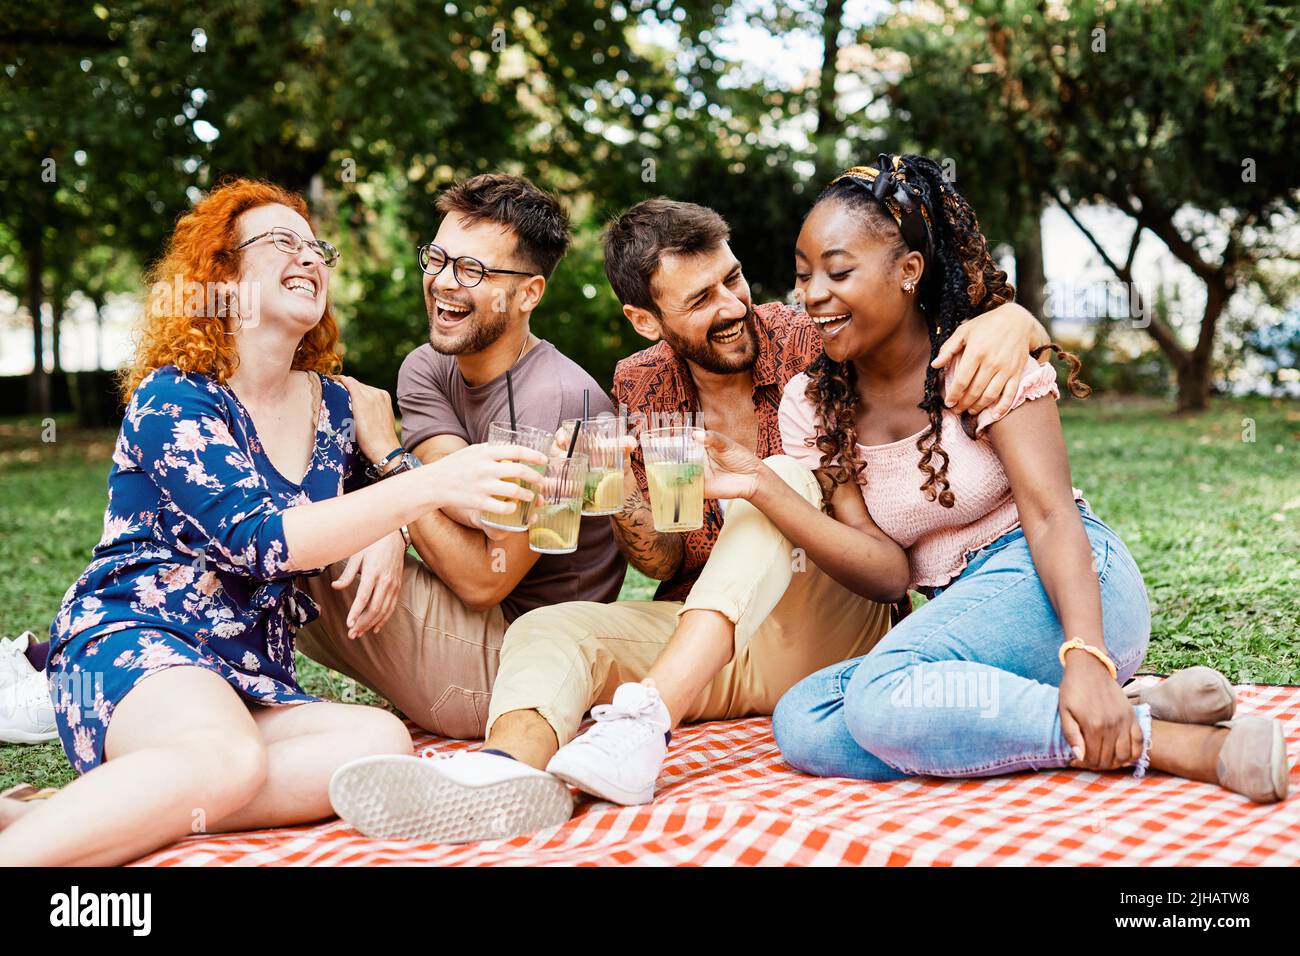 picnic fun outdoor woman friend summer friendship man lifestyle smiling happy toast party couple Stock Photo